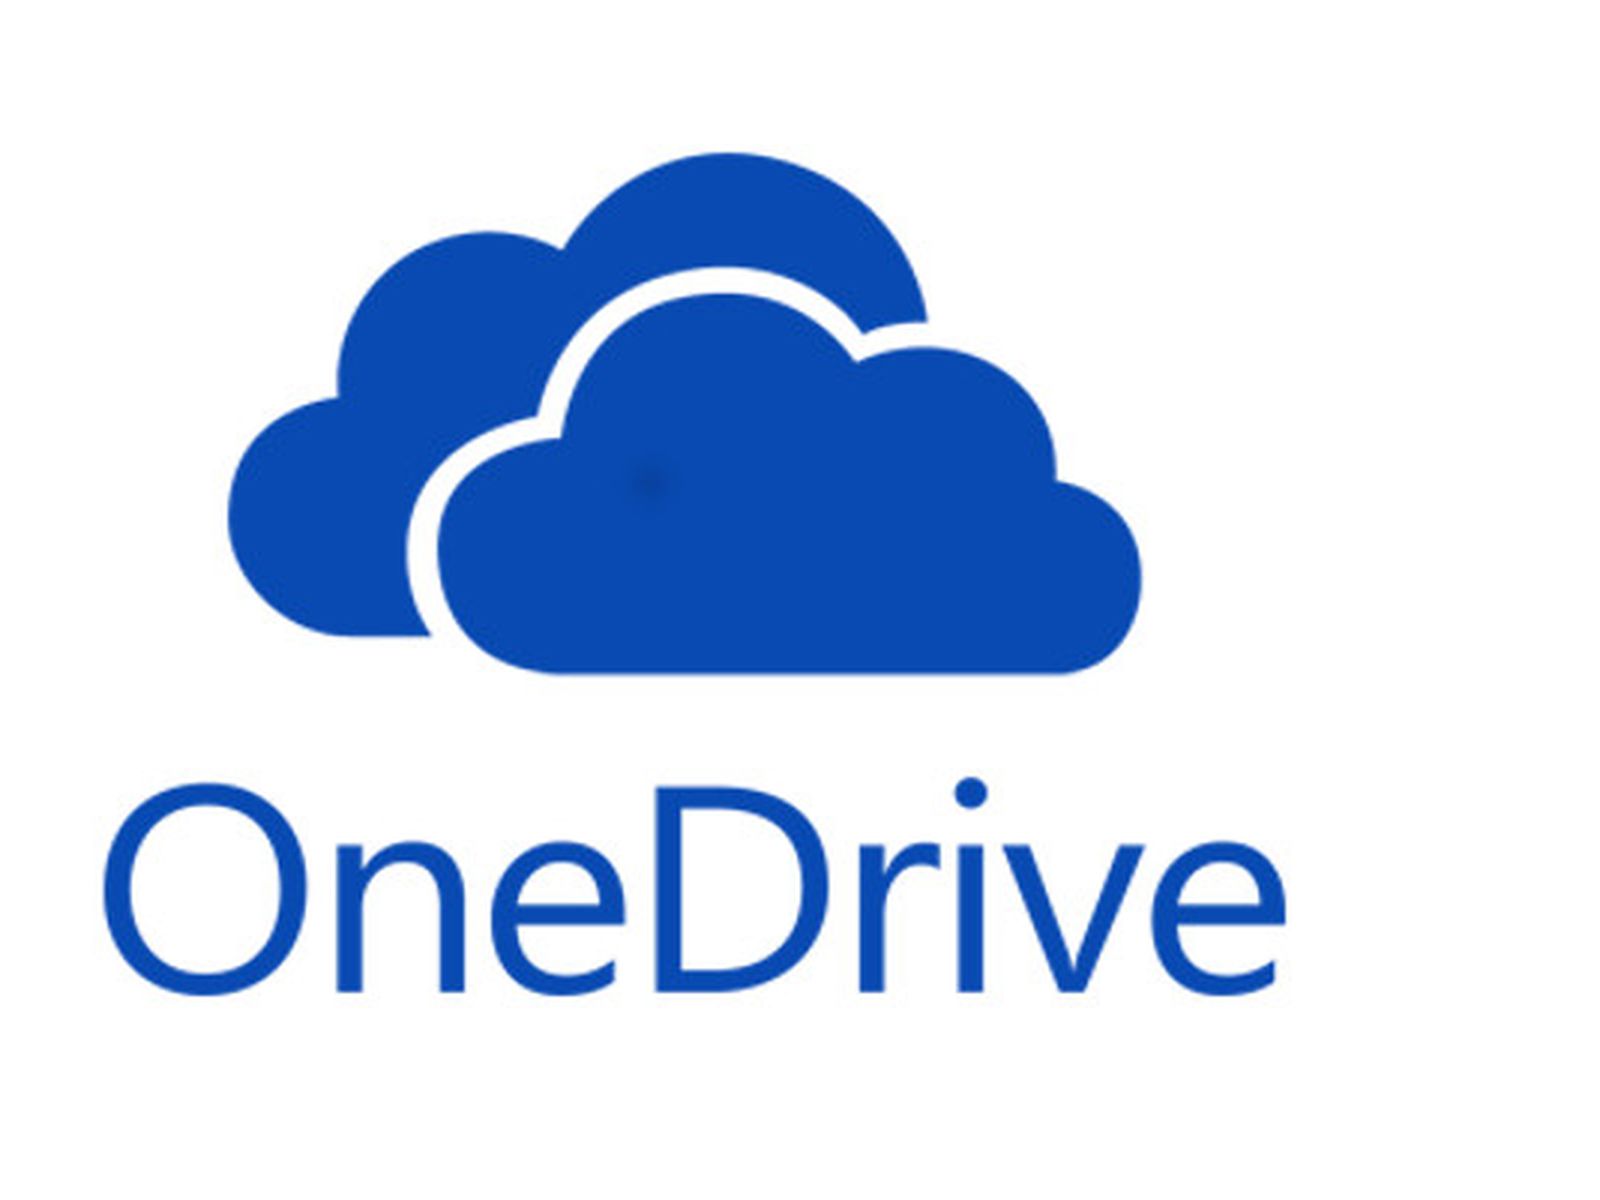 Download the OneDrive App for PC, Mac, Android, or iOS – Microsoft